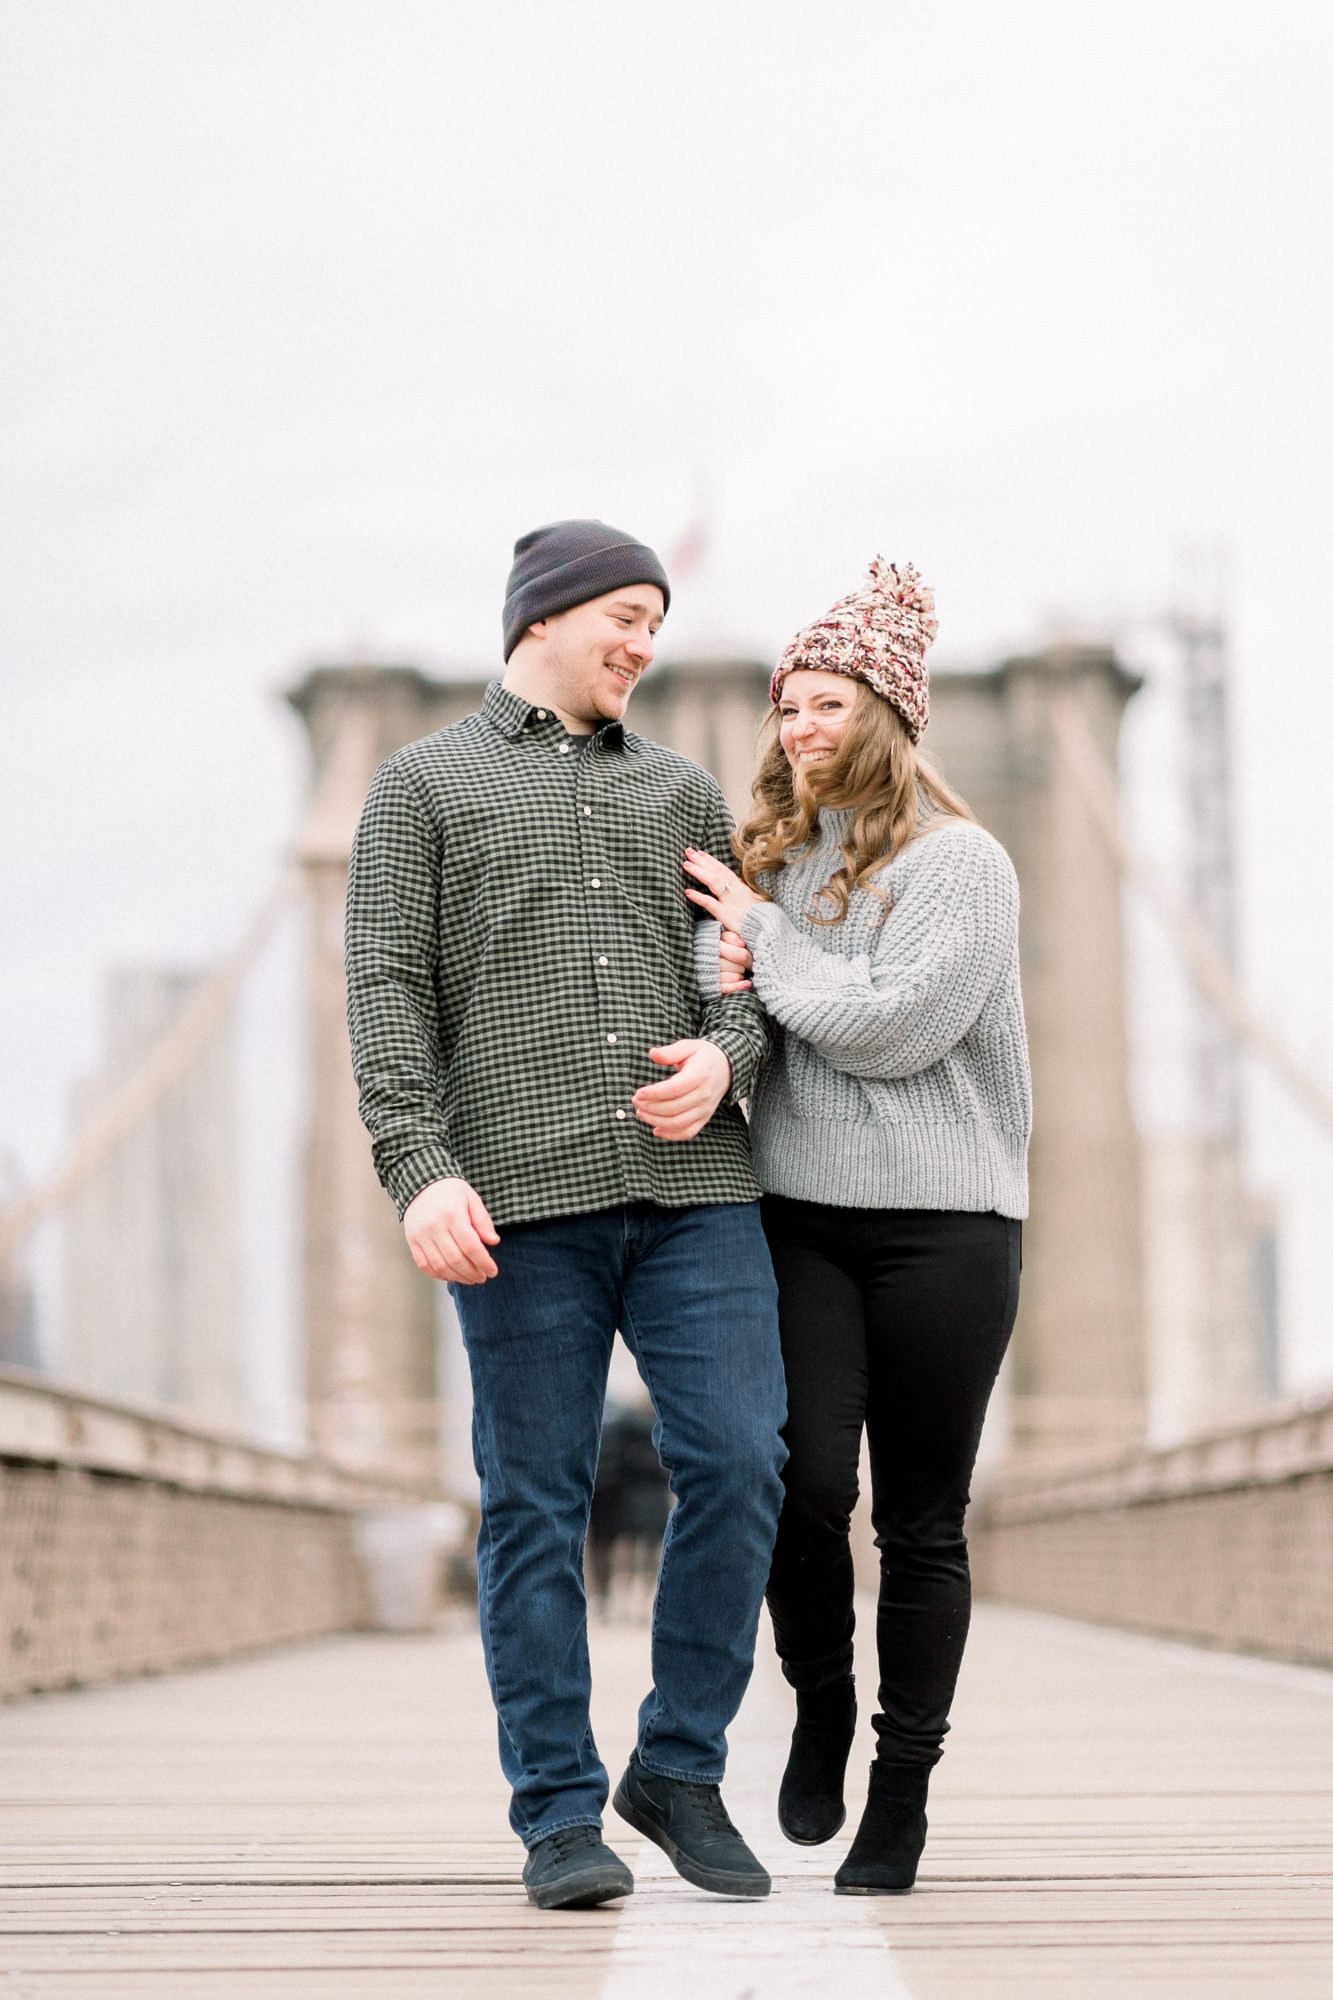 New York Engagement Photo Locations in New York City